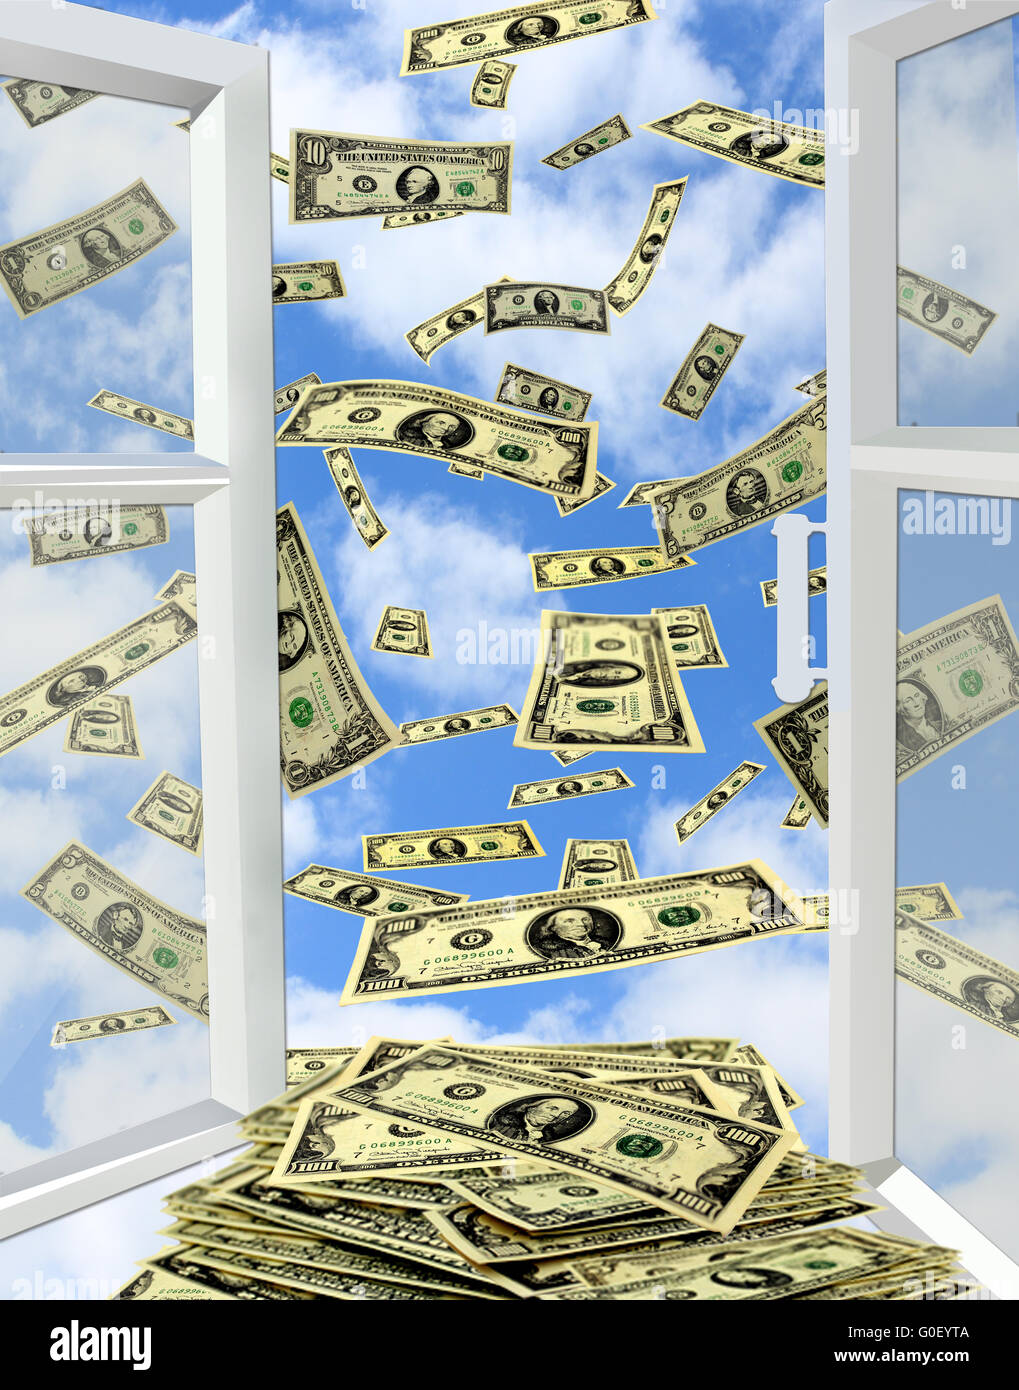 dollars flying out from opened window Stock Photo